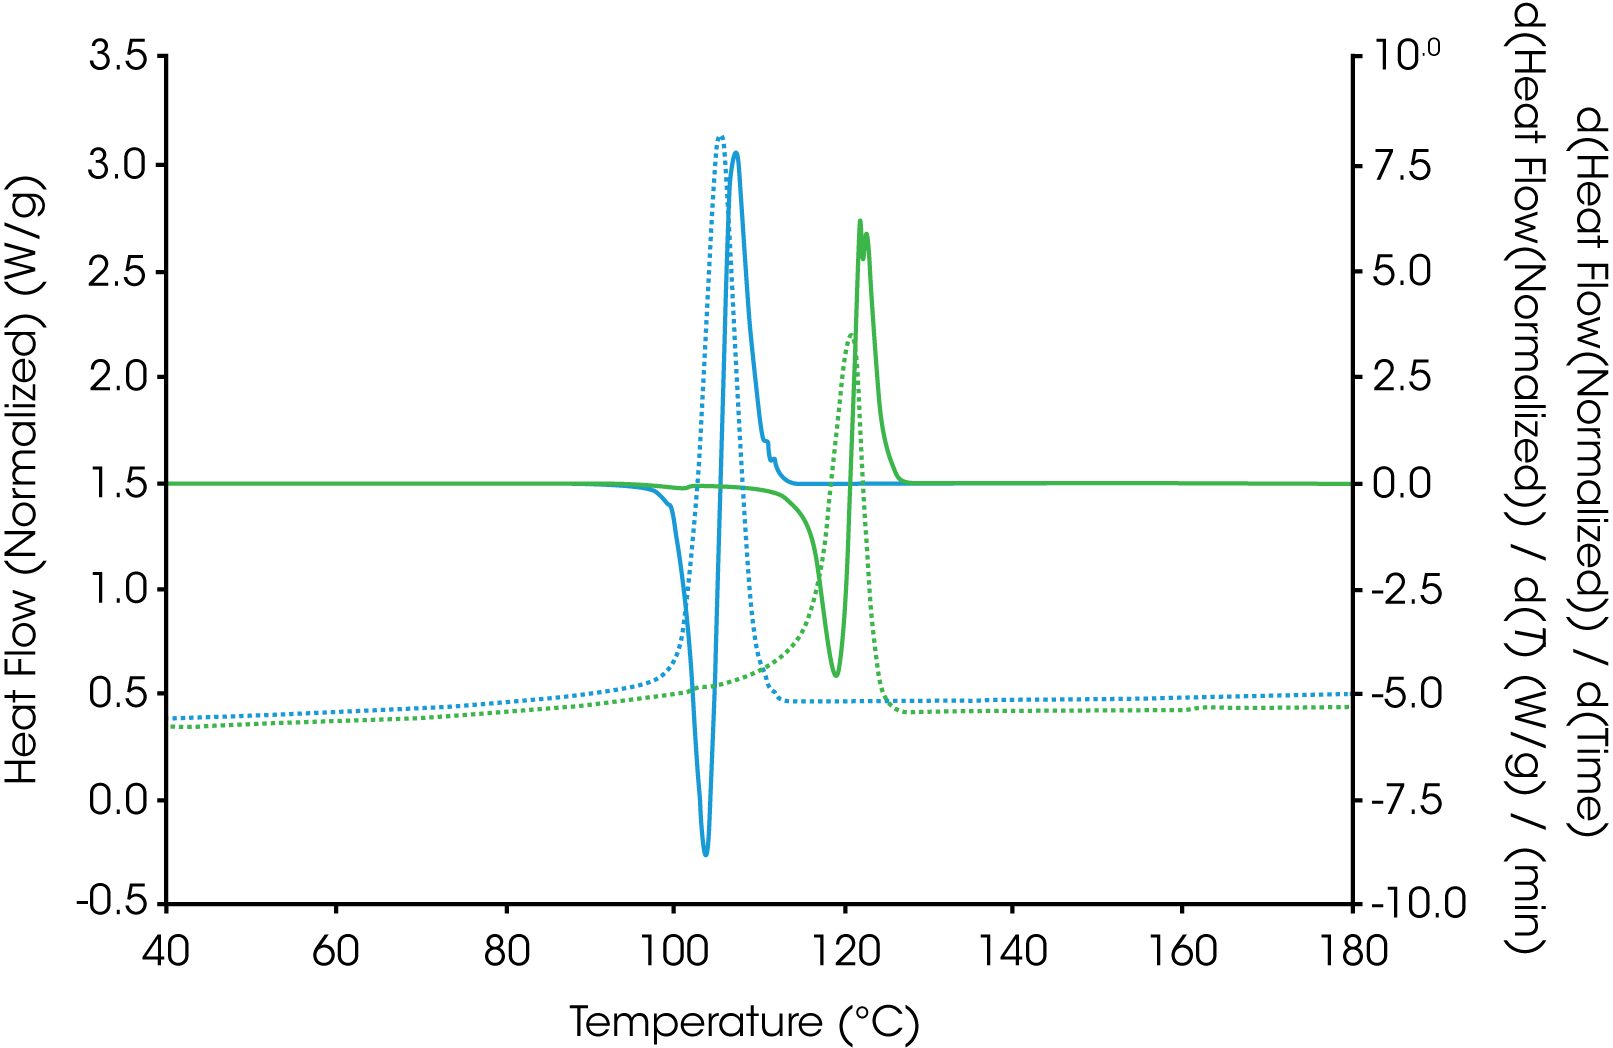 Figure 2. Random Copolymers from Figure 1 Shown with Derivative of Heat Flow with Respect to Time